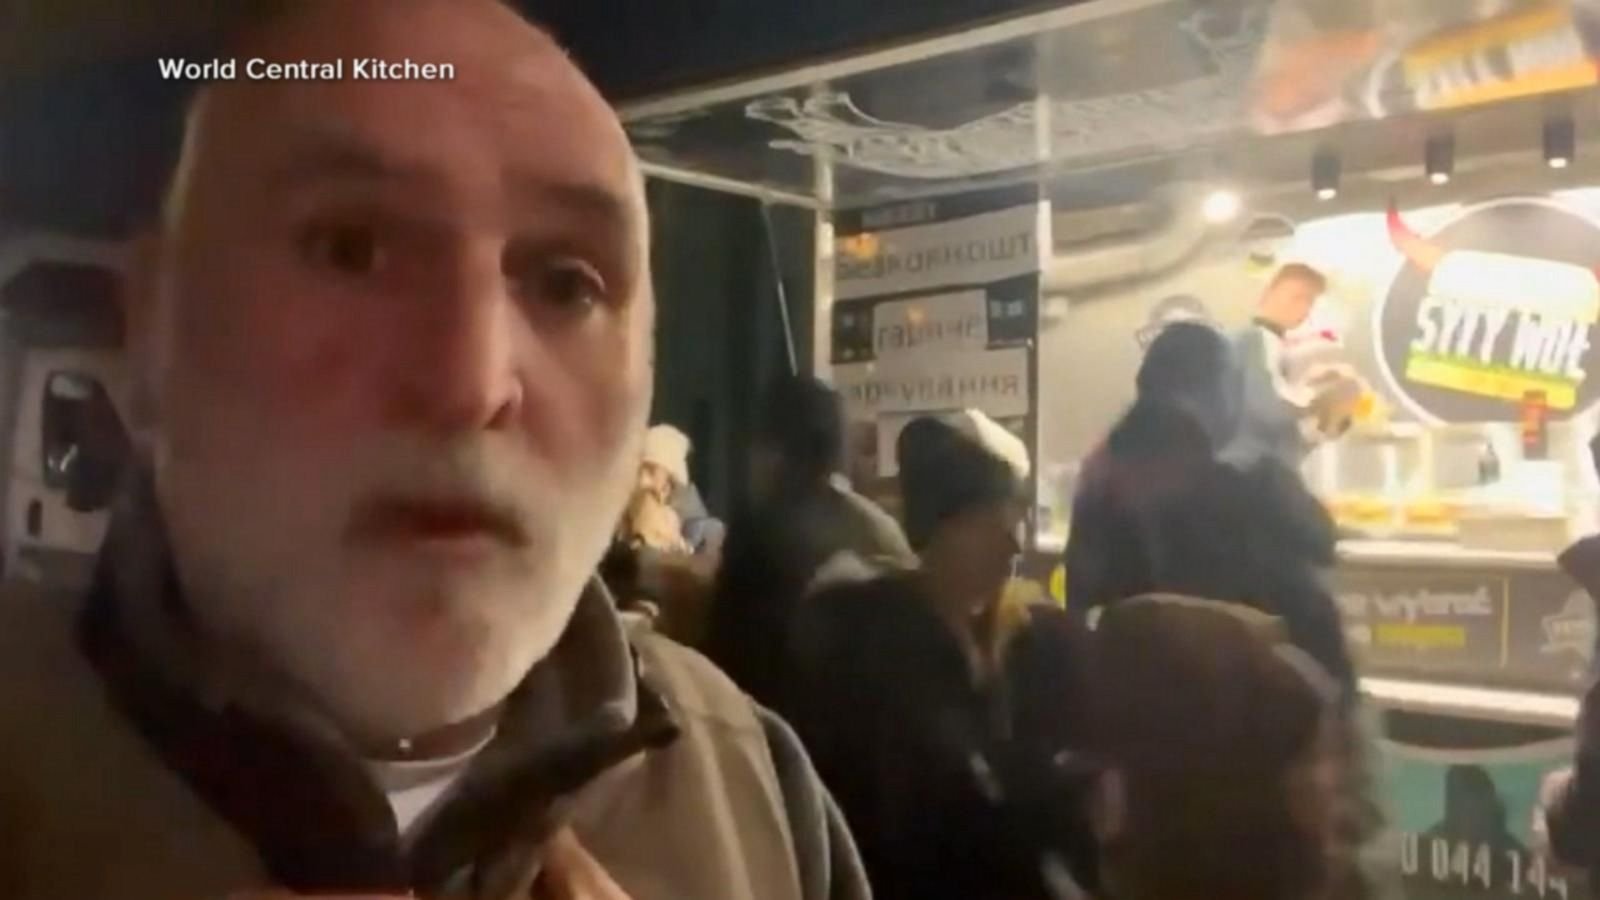 World renowned chef Jose Andres on the front lines in Ukraine